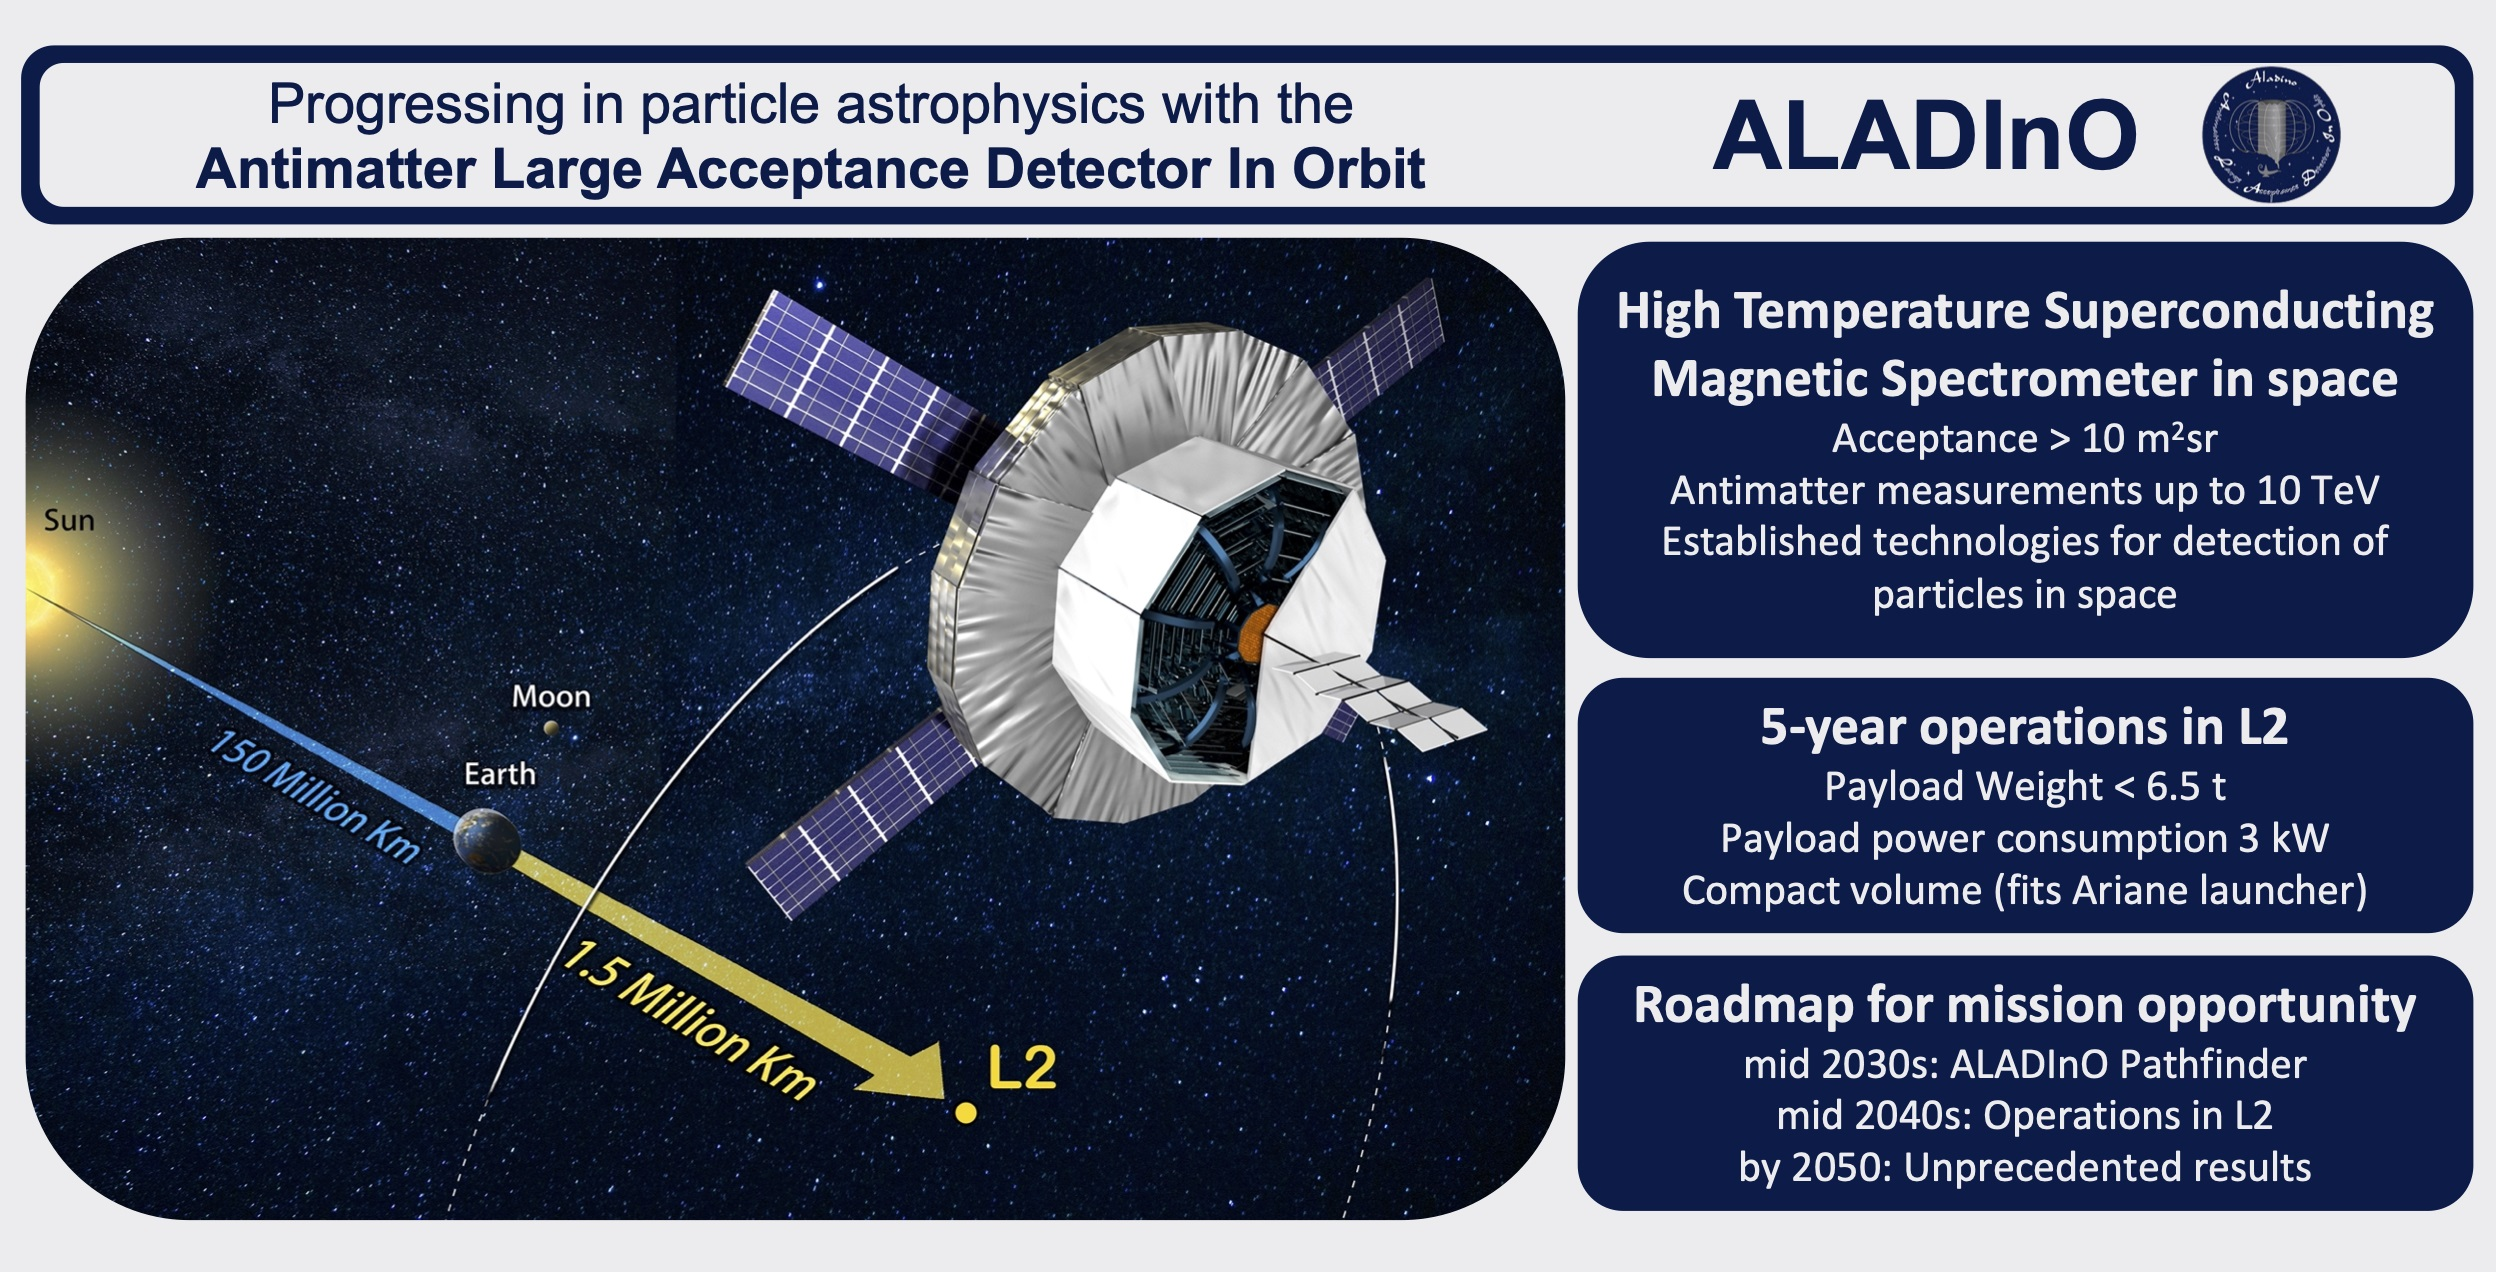 Large Free of Acceptance | | Orbit Full-Text Antimatter Detector Instruments In (ALADInO) an Design